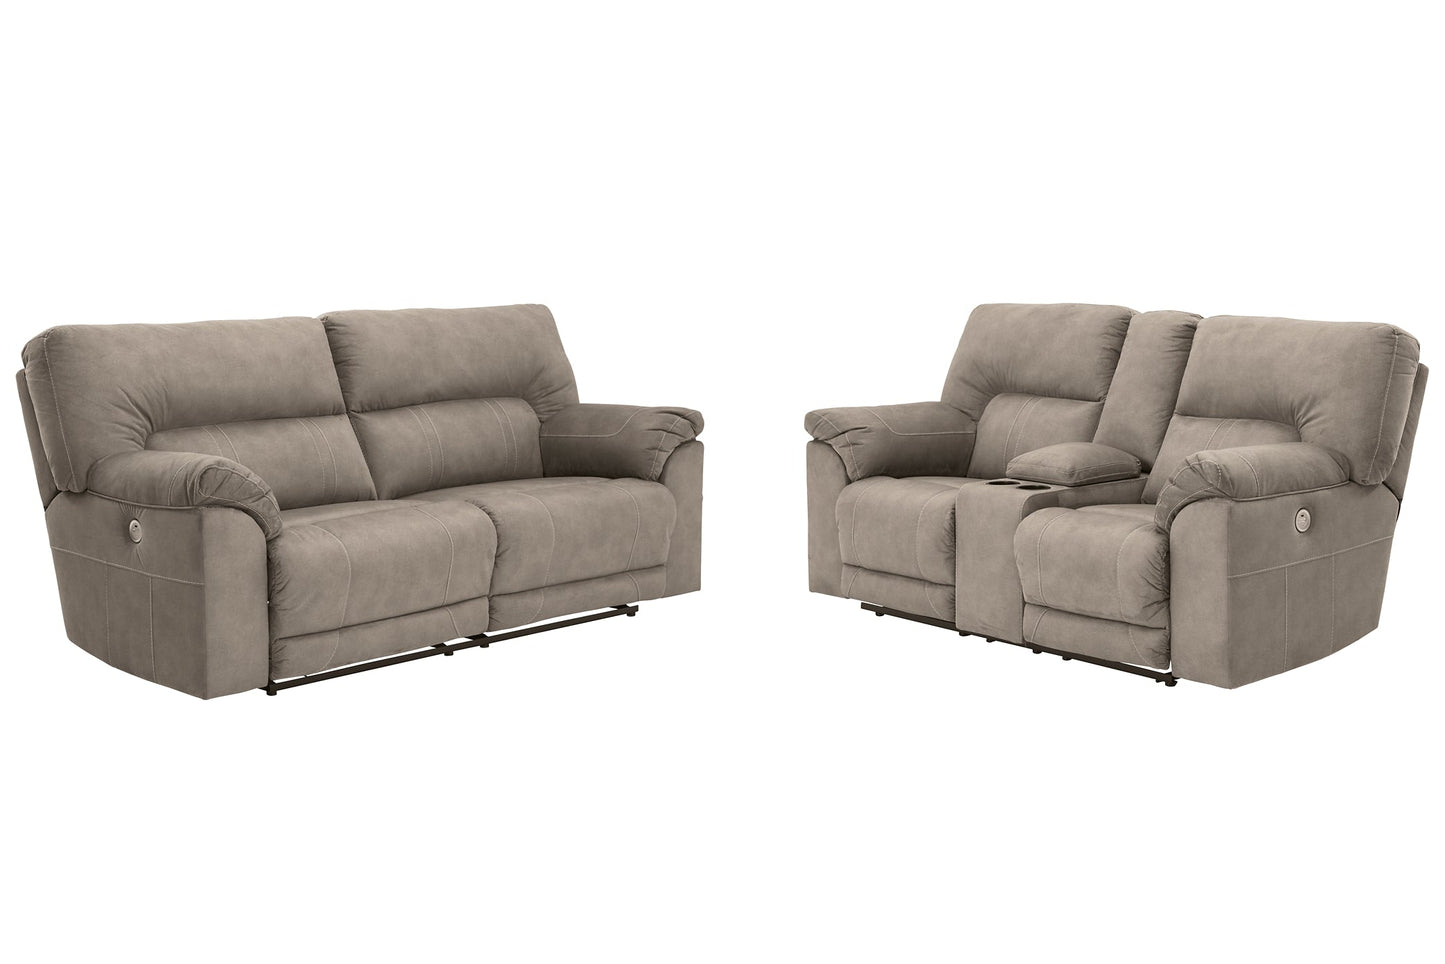 Cavalcade Sofa and Loveseat at Walker Mattress and Furniture Locations in Cedar Park and Belton TX.